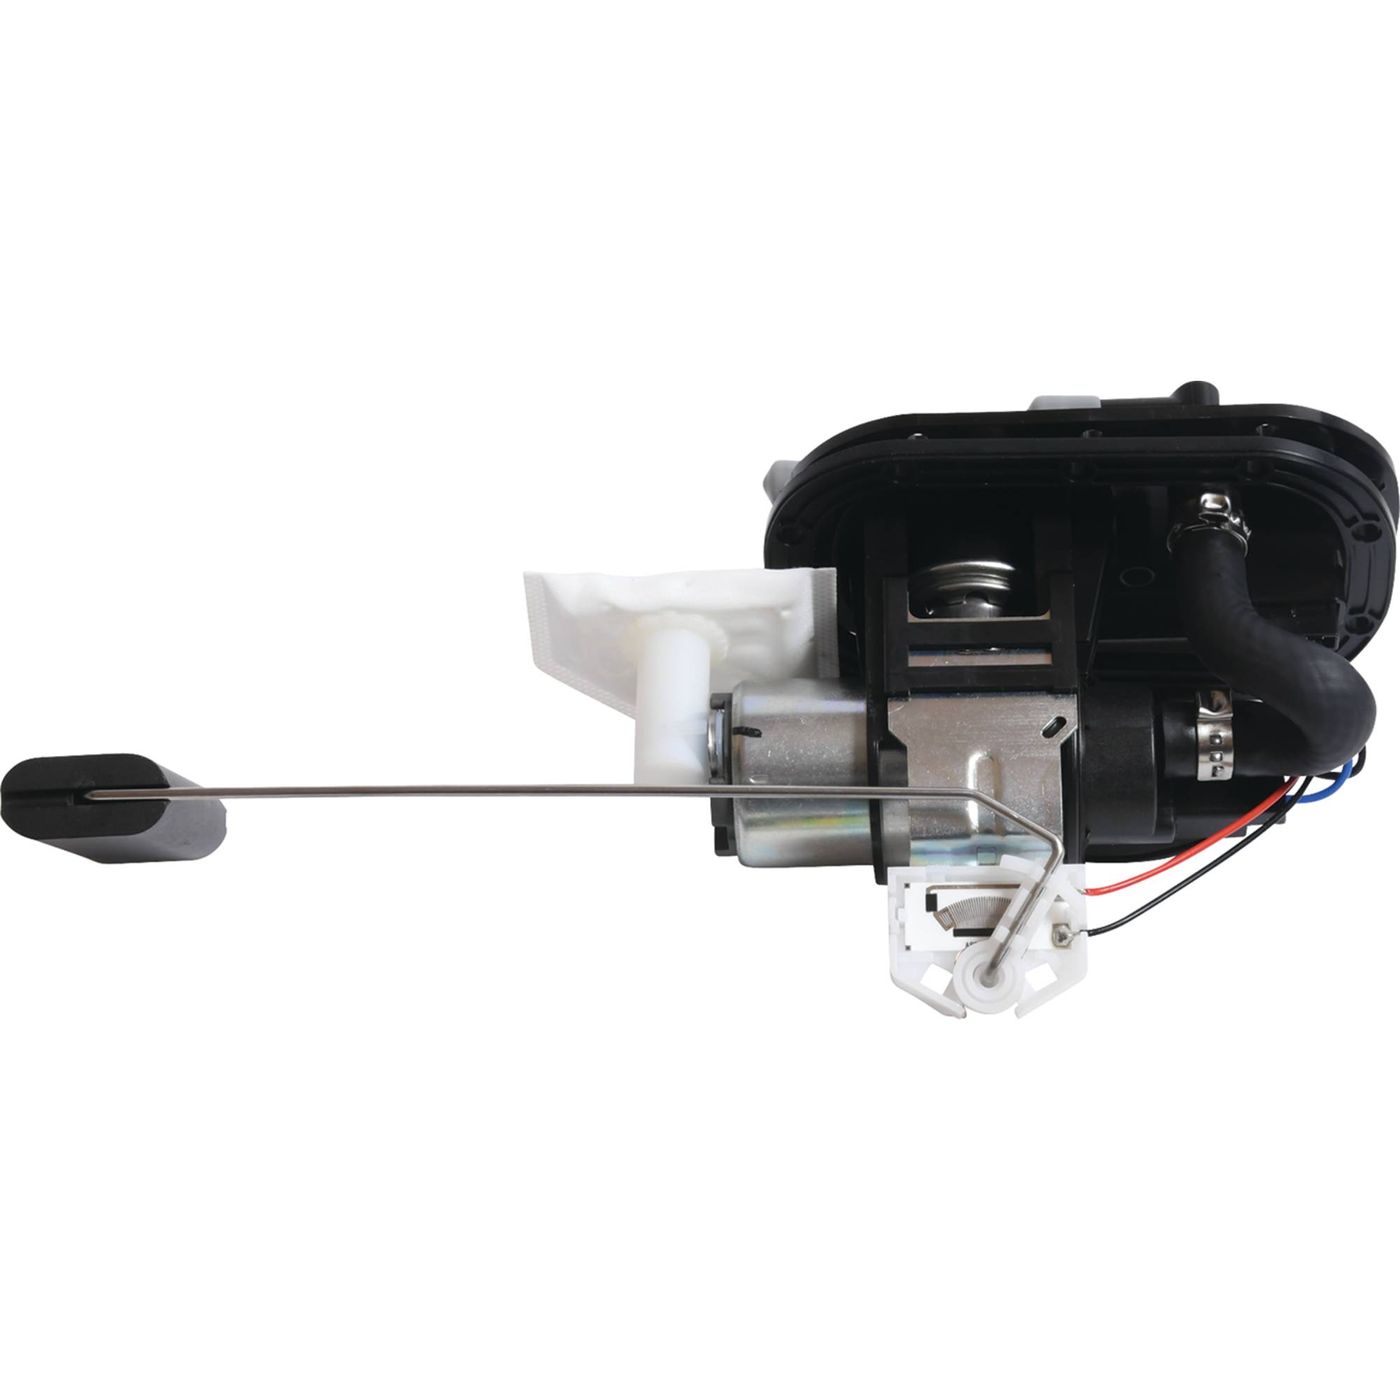 Wrp Fuel Pump Modules - WRP471023 image